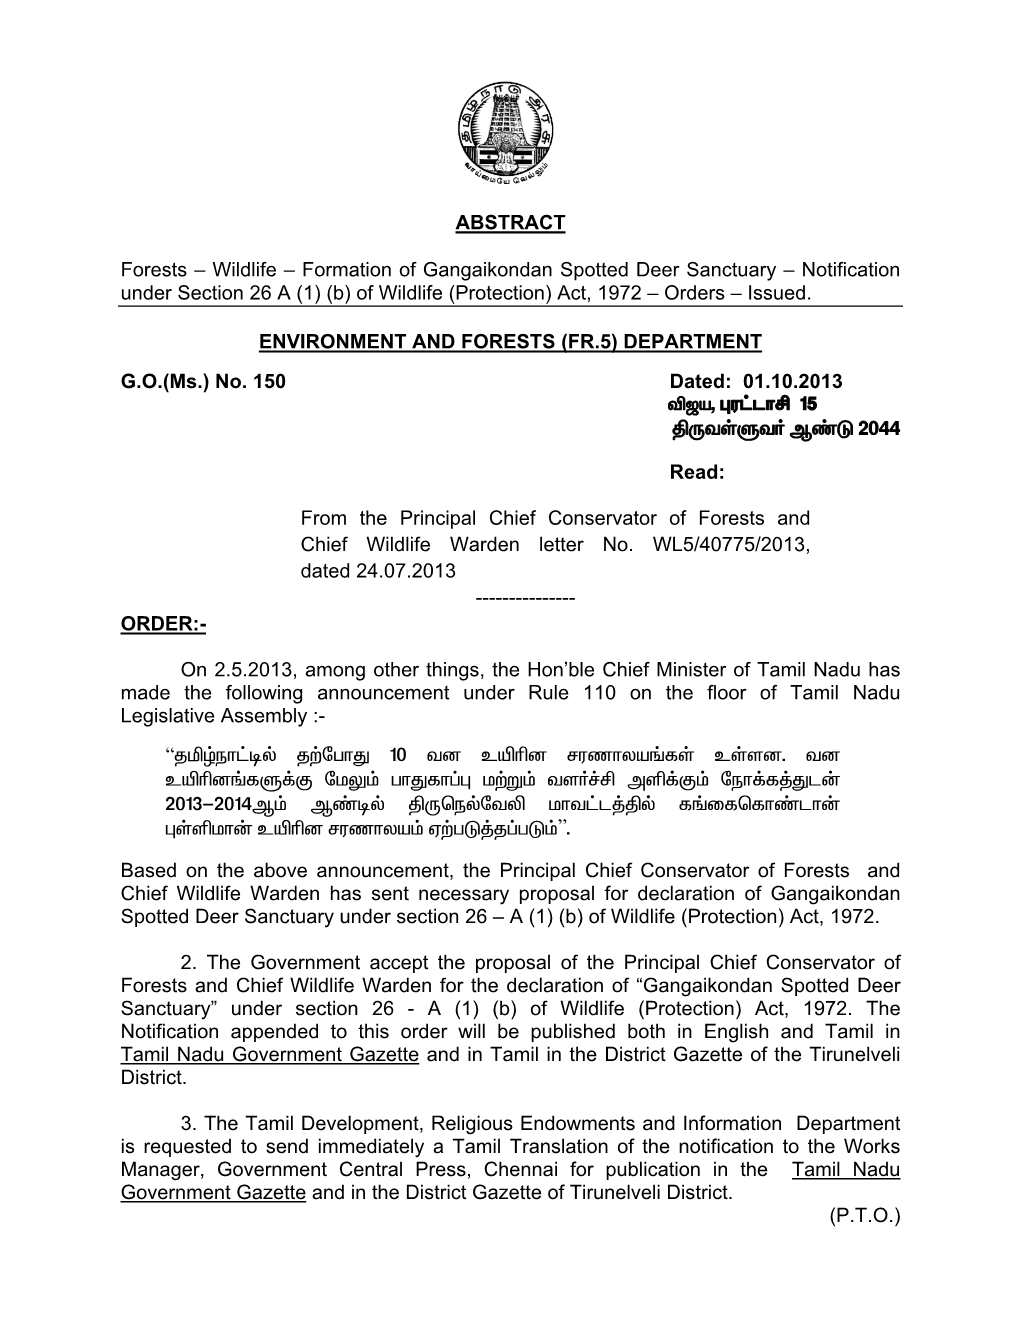 Wildlife – Formation of Gangaikondan Spotted Deer Sanctuary – Notification Under Section 26 a (1) (B) of Wildlife (Protection) Act, 1972 – Orders – Issued